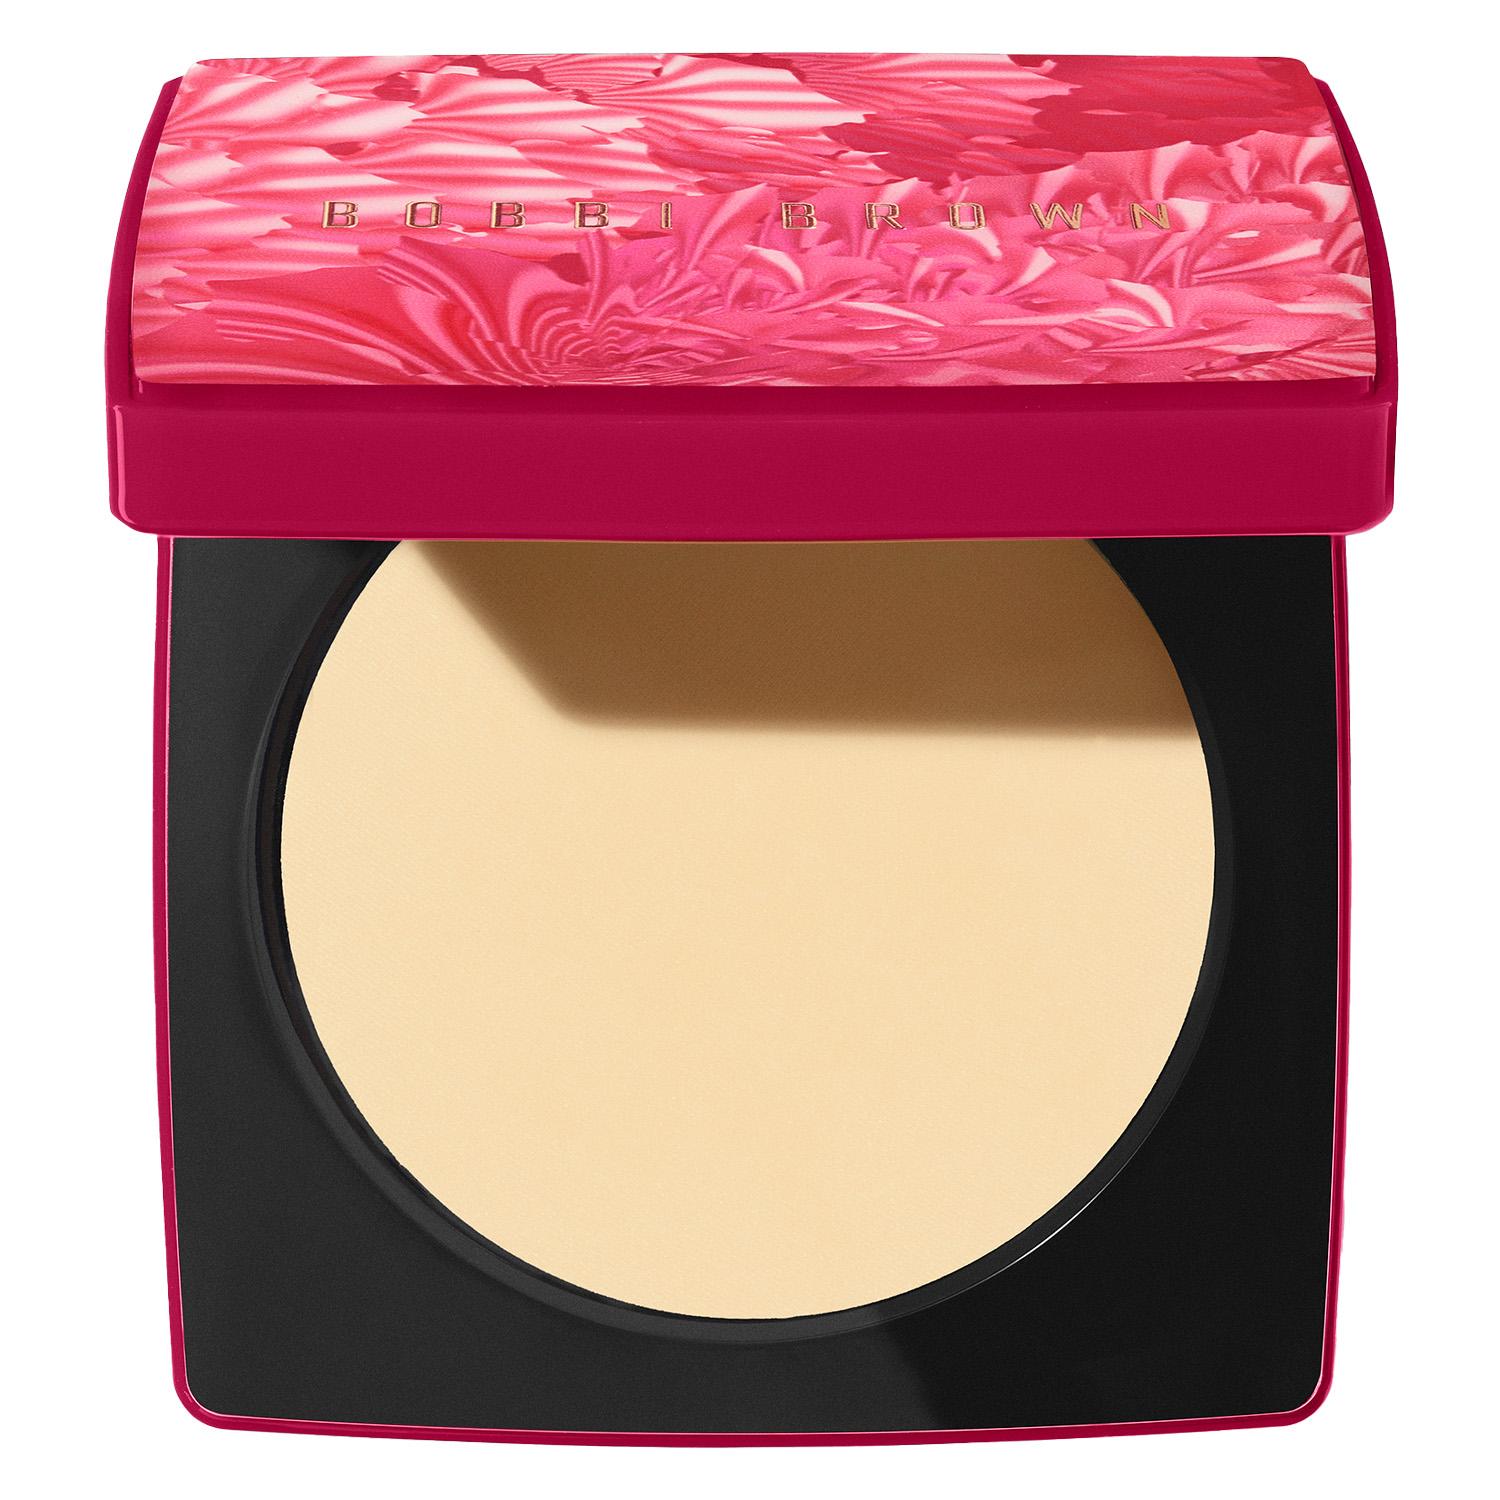 Lunar New Year Collection - Sheer Finish Pressed Powder Pale Yellow